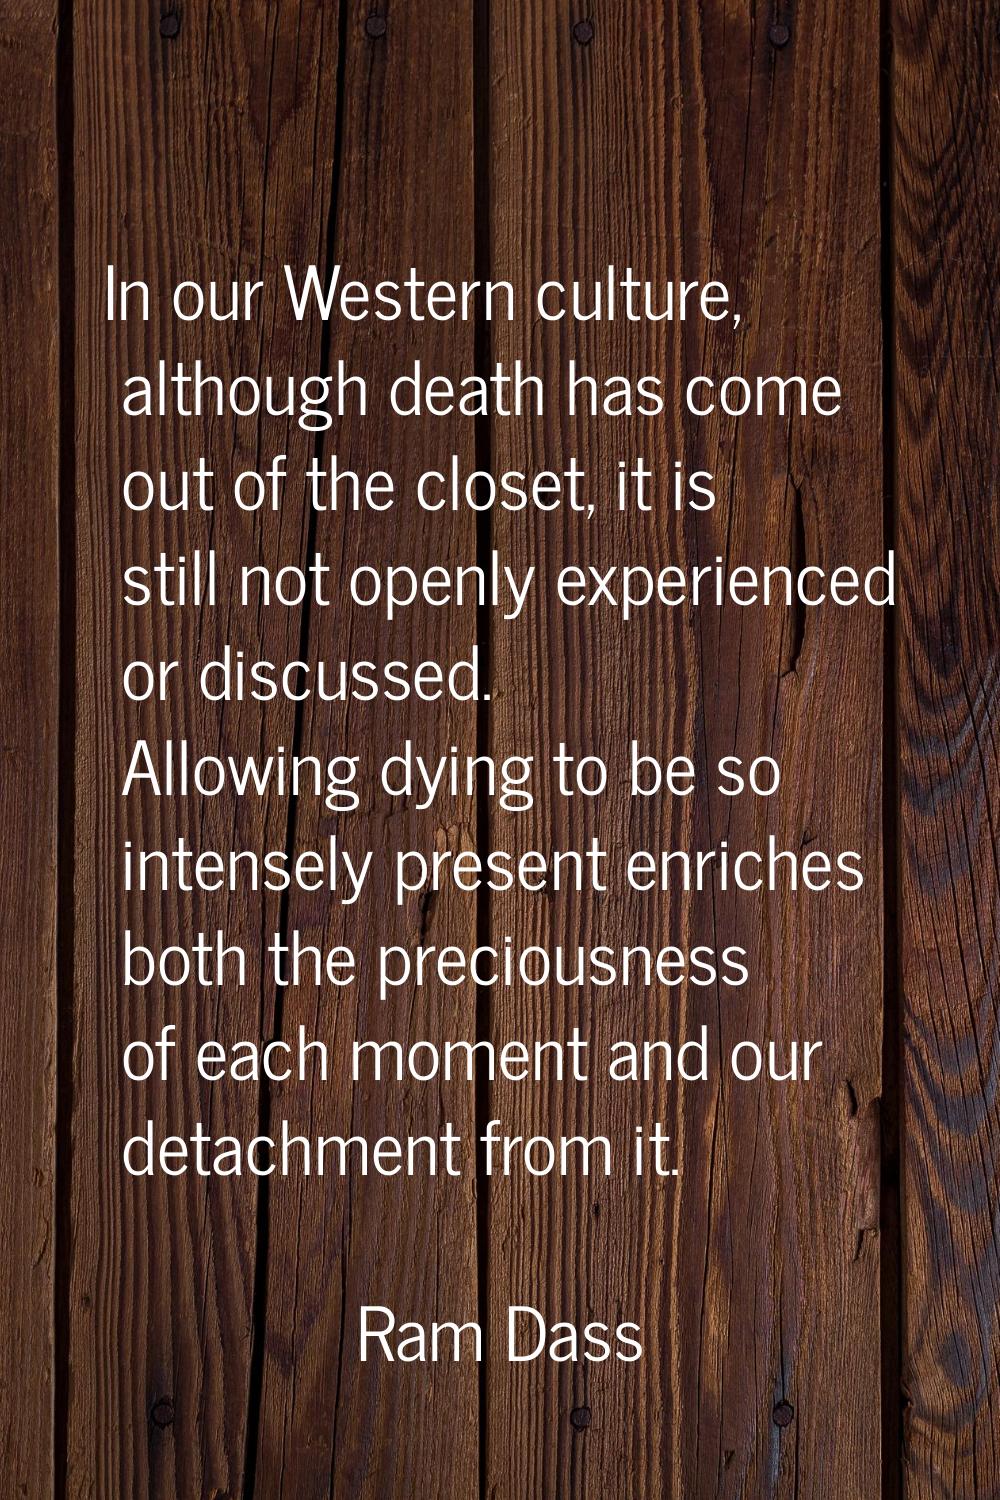 In our Western culture, although death has come out of the closet, it is still not openly experienc